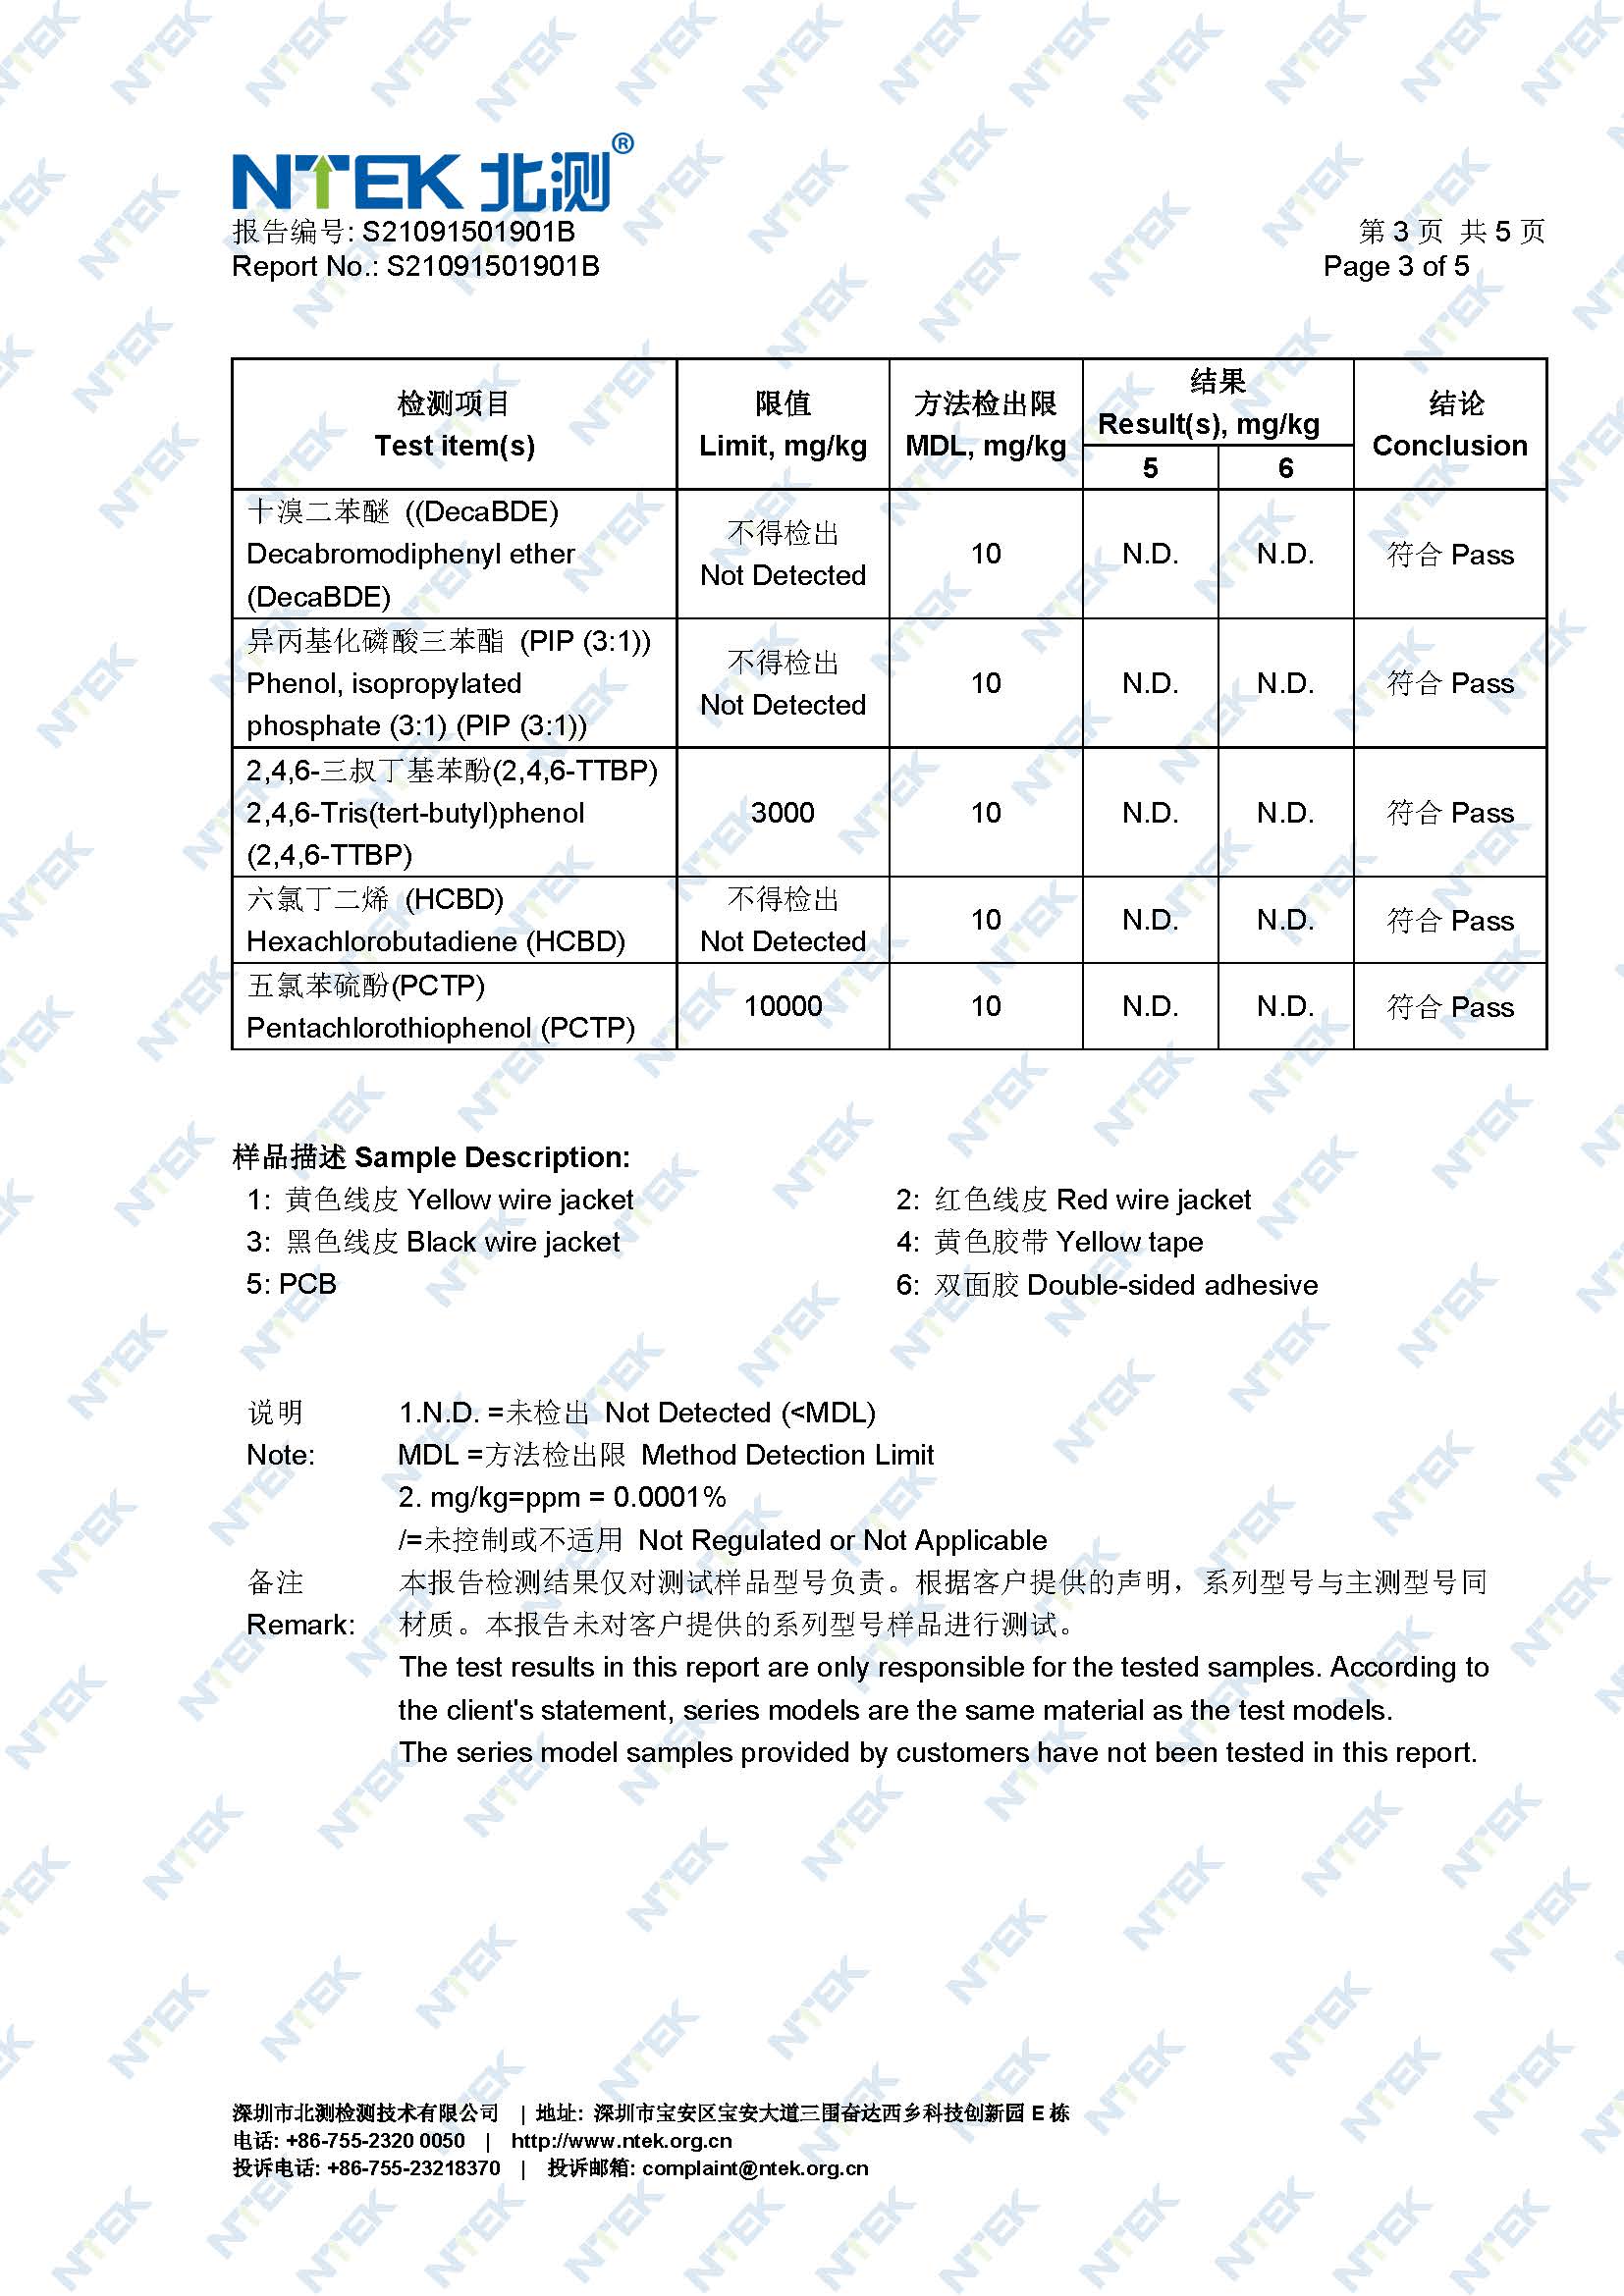 A&S Power 505055 Lithium polymer battery TSCA REPORT